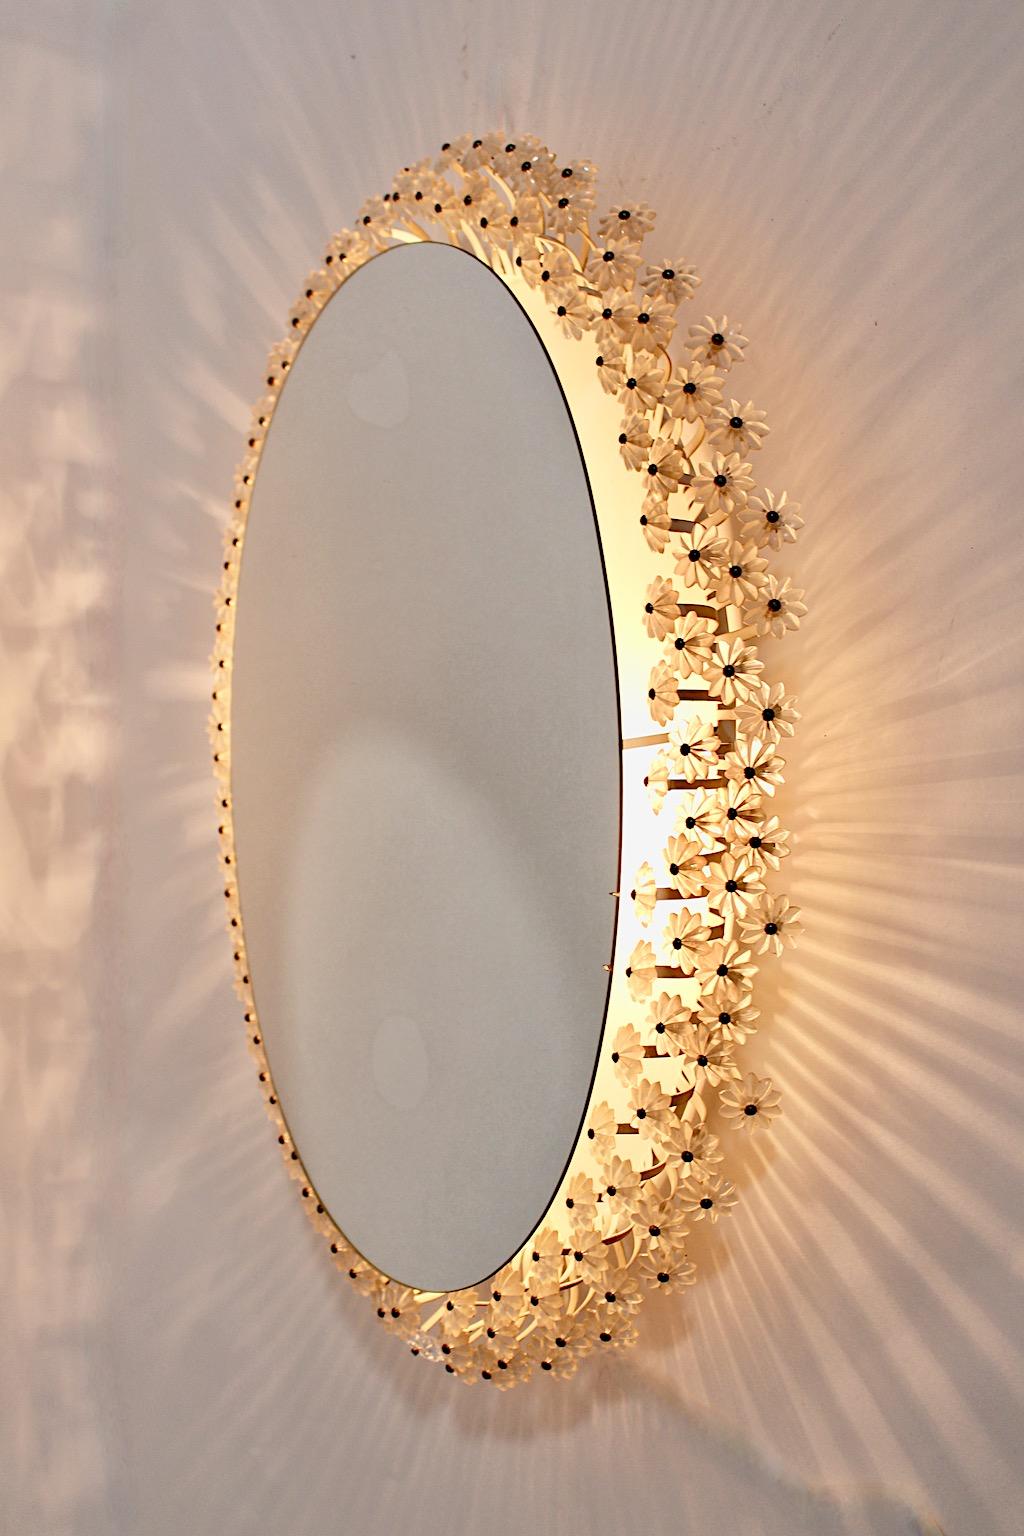 Mid-Century Modern vintage backlit oval wall mirror with many lucite flowers by Emil Stejnar 1950s Vienna.
This stunning wall mirror oval like from white lacquered metal features many lucite flowers and backlit.
Two E 14 sockets
Good condition